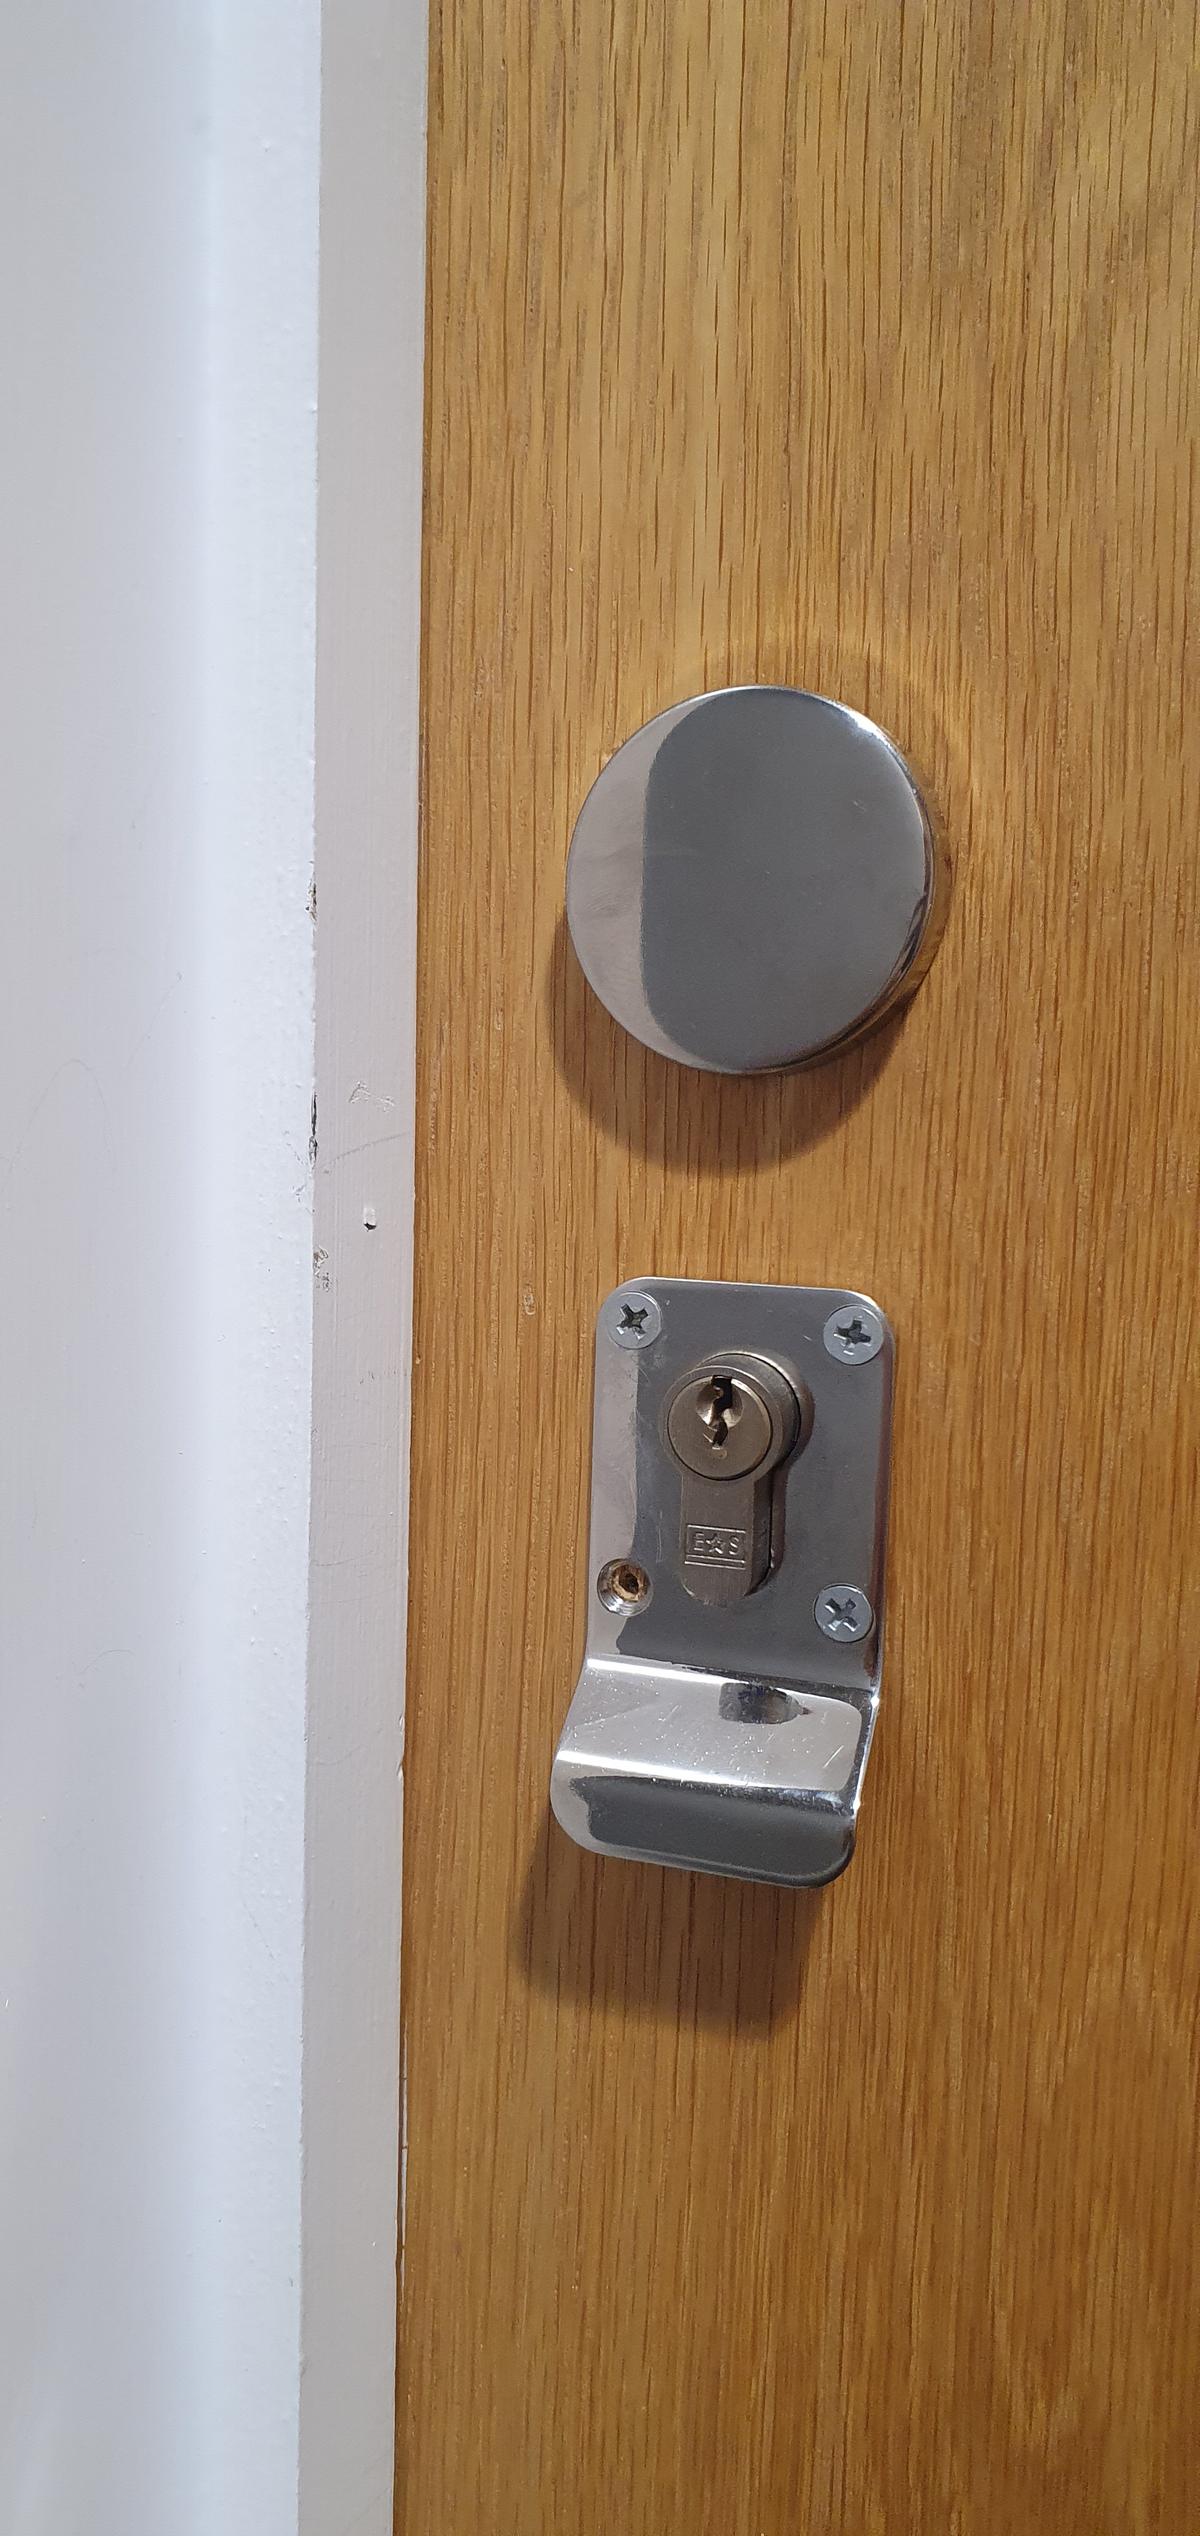 A picture of a lock that has been open in a emergency lockout